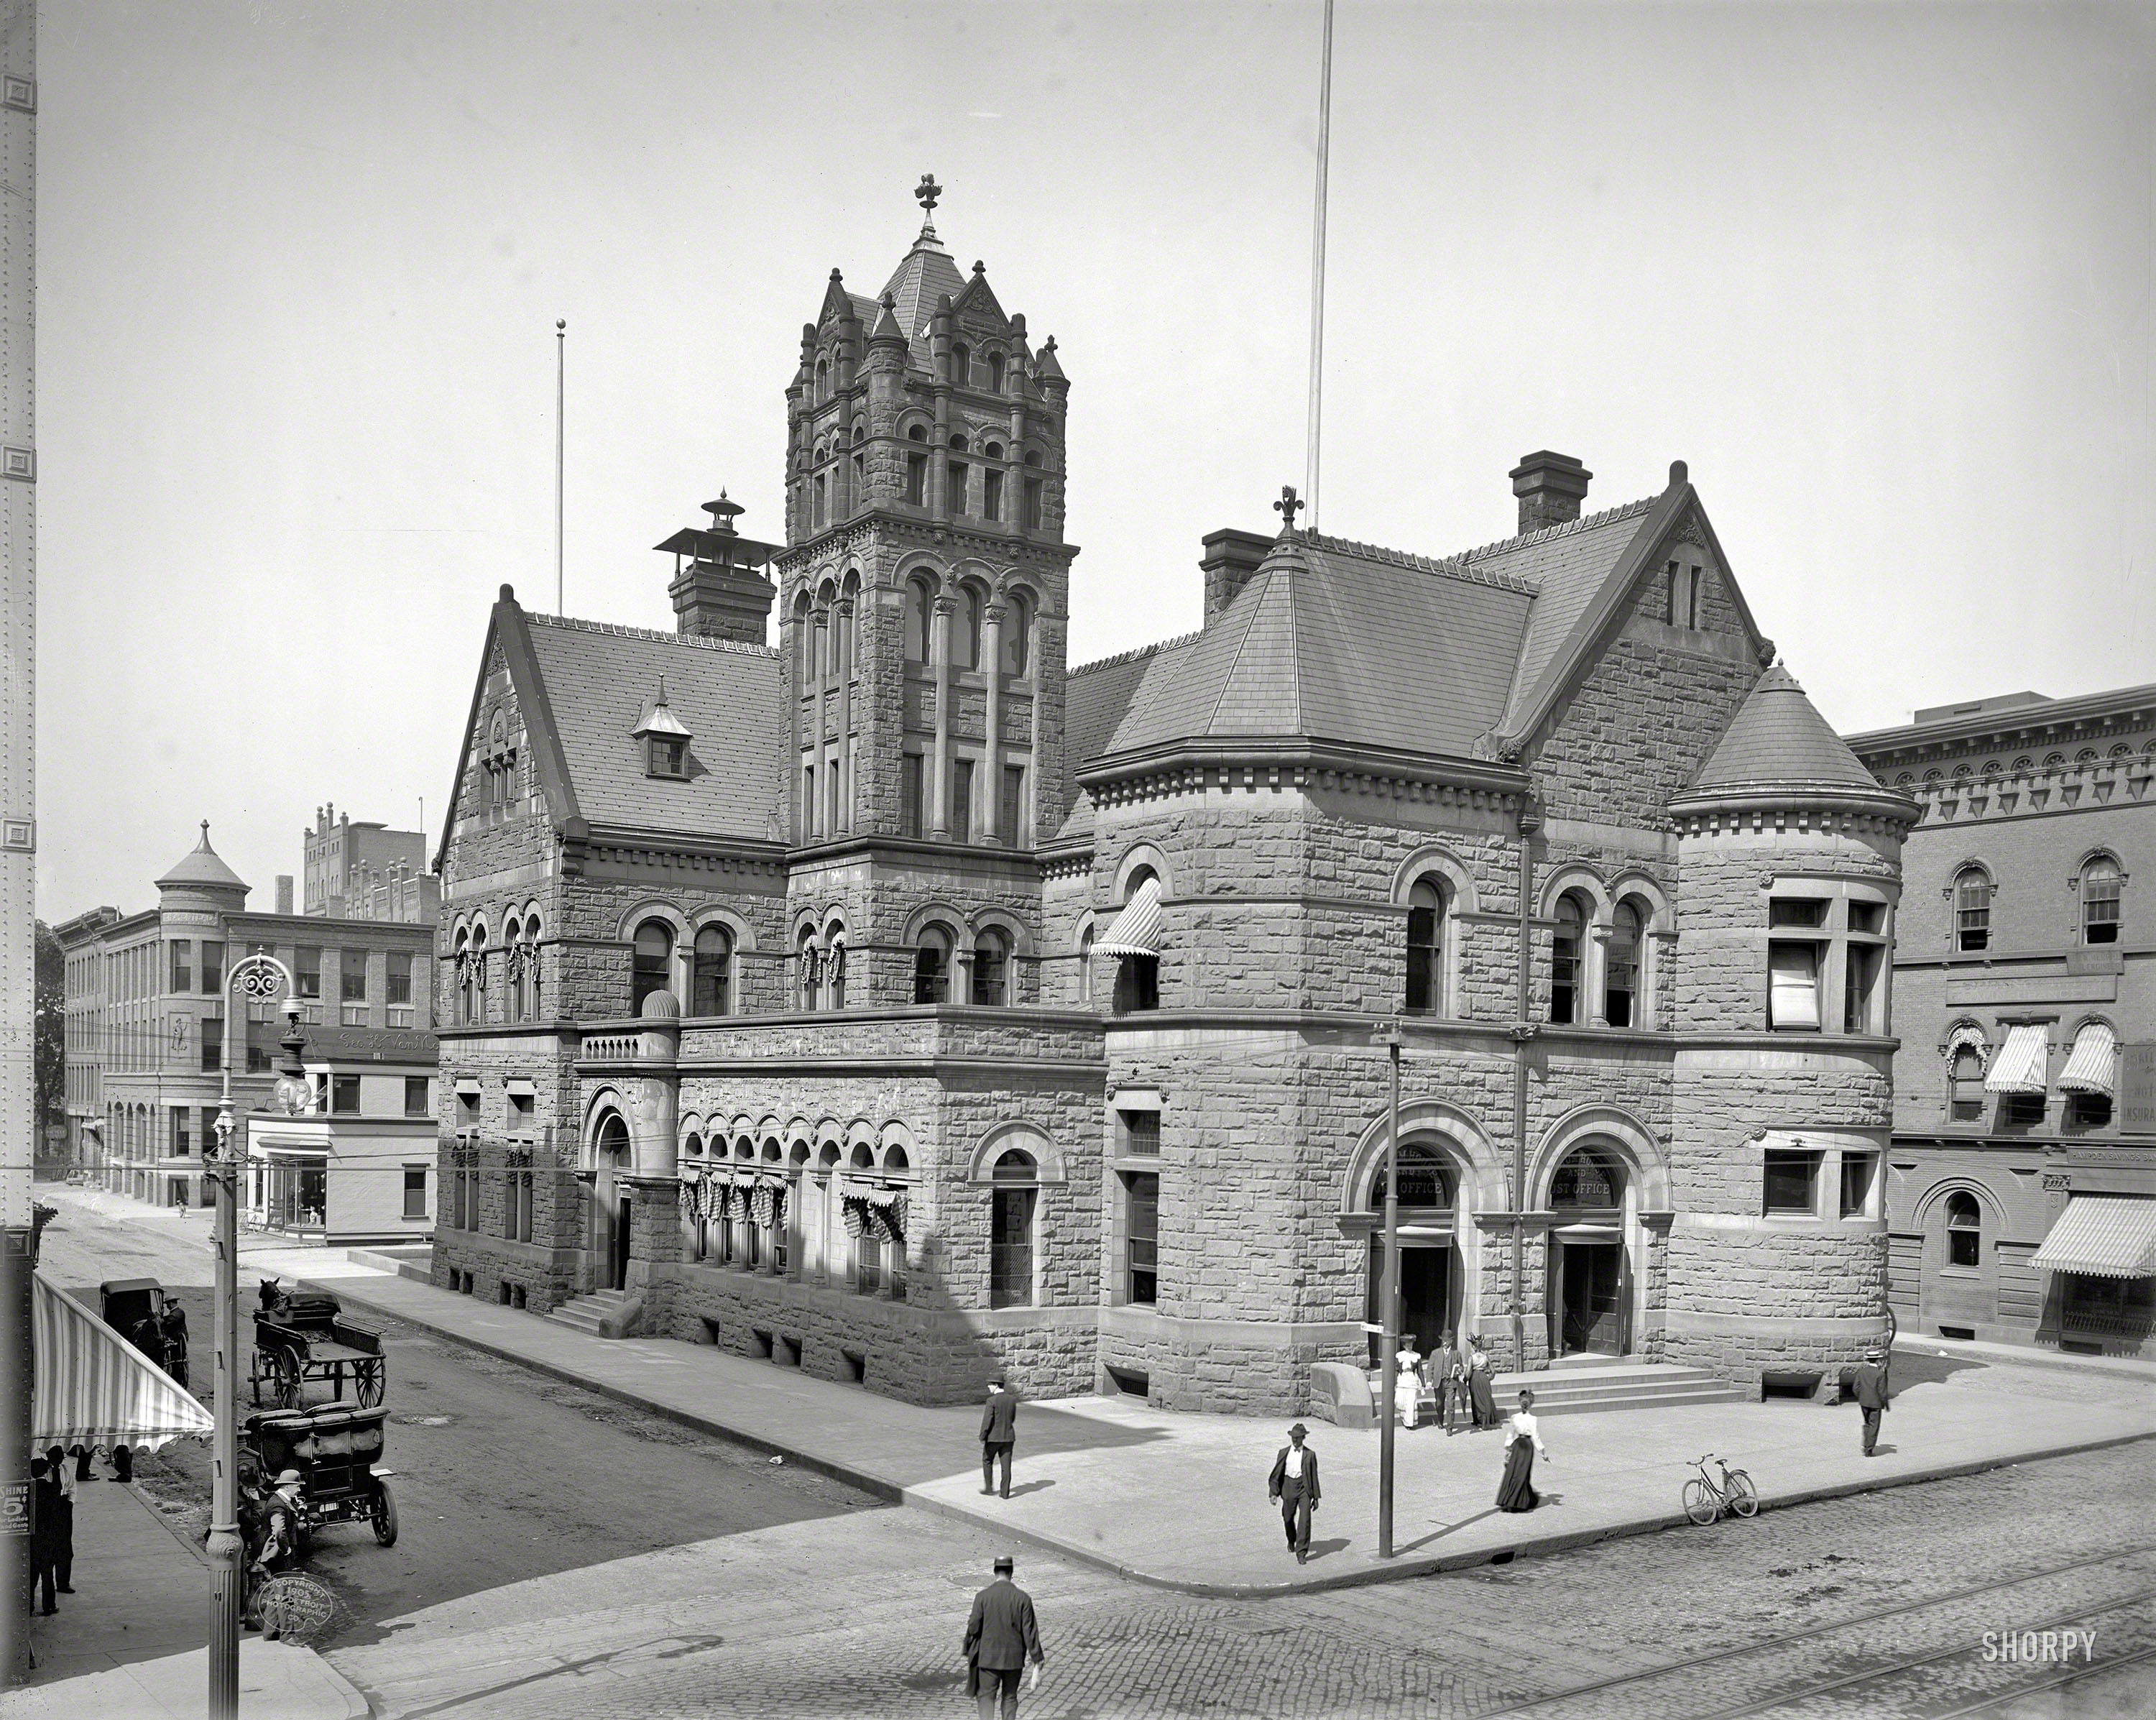 Circa 1905. "Federal building -- Springfield, Massachusetts. Custom House and Post Office." 8x10 inch glass negative, Detroit Photographic Company. View full size.